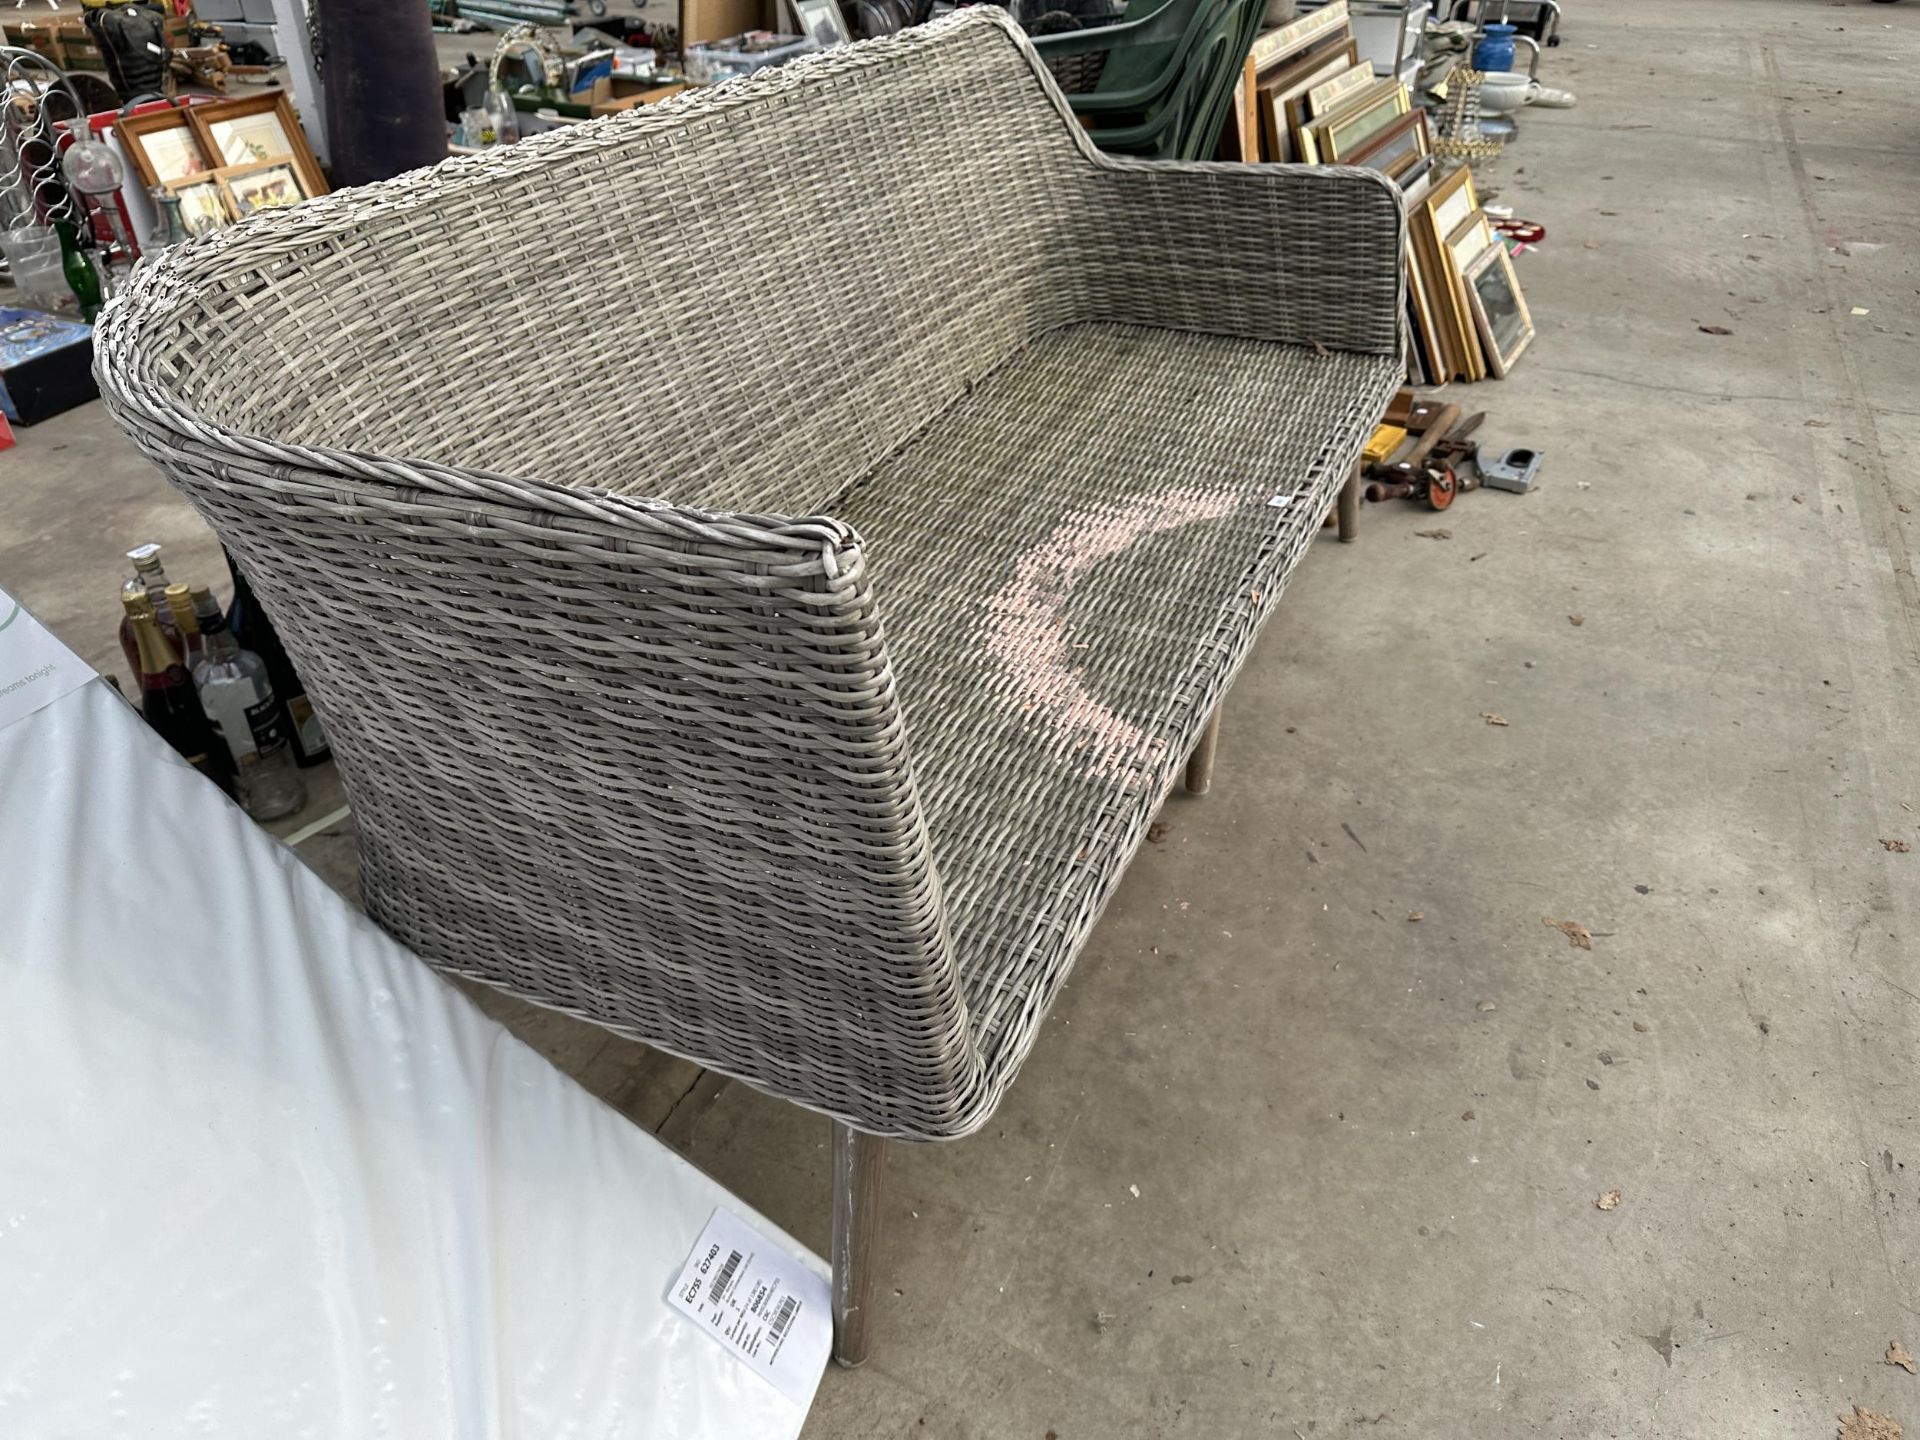 A LARGE WICKER THREE SEATER BENCH - Image 4 of 4